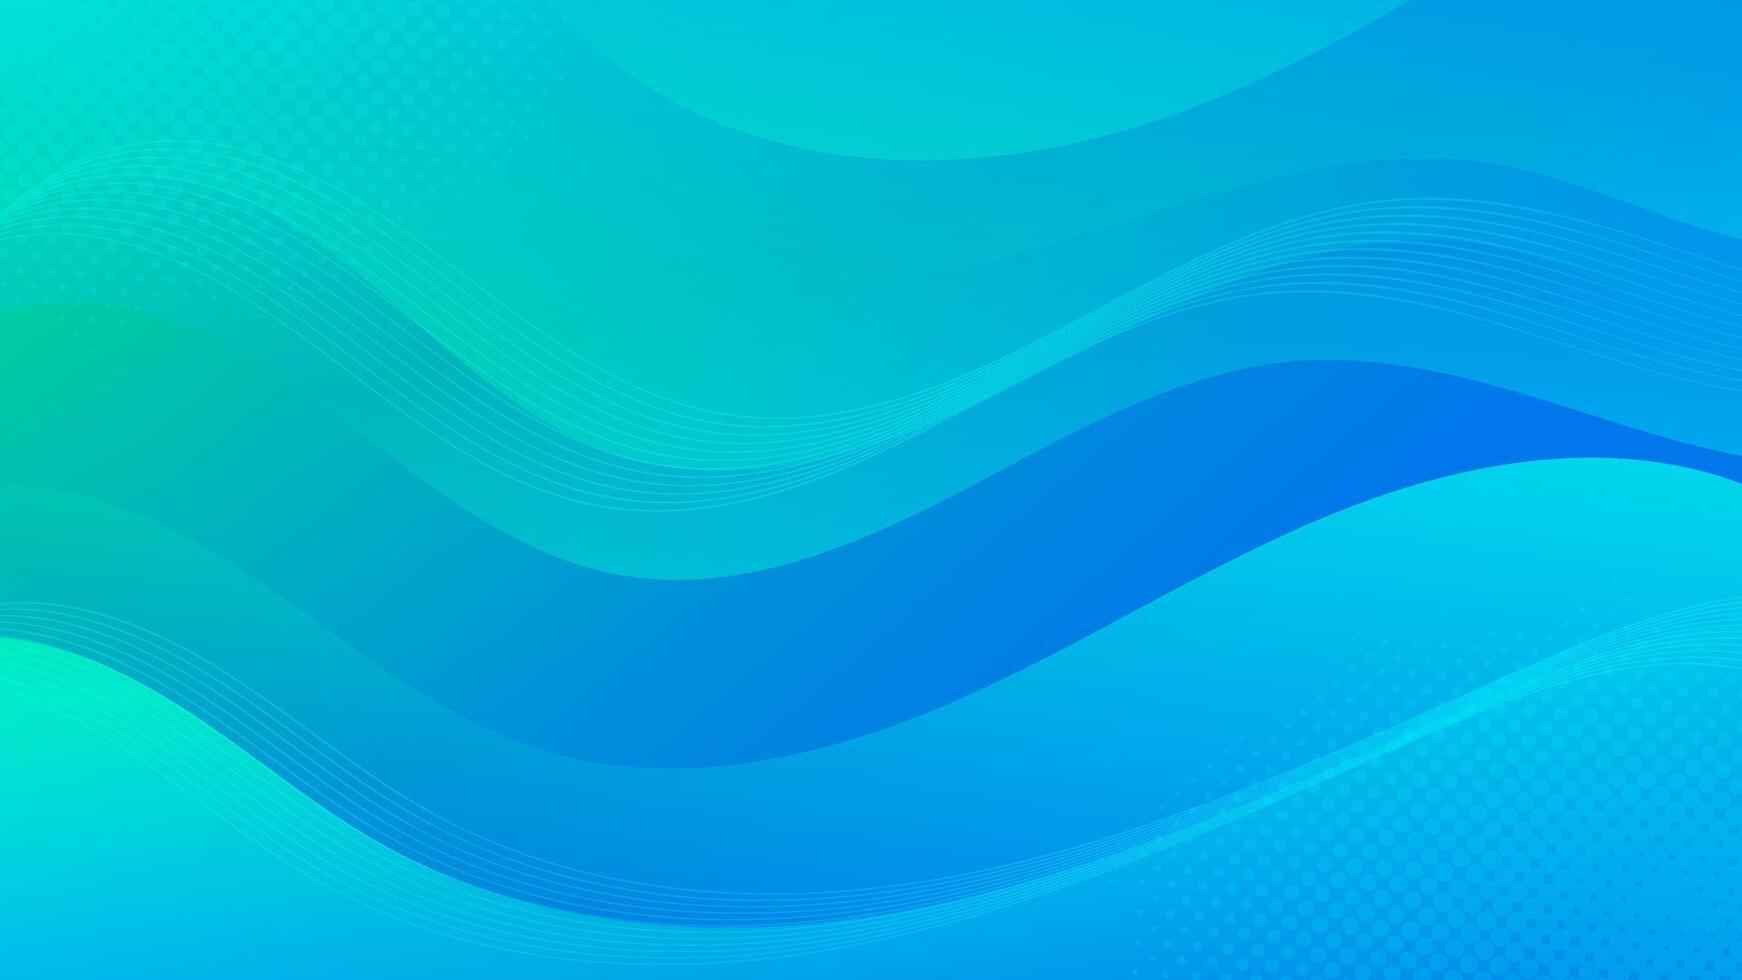 Abstract green blue Background with Wavy Shapes. flowing and curvy shapes. This asset is suitable for website backgrounds, flyers, posters, and digital art projects. vector